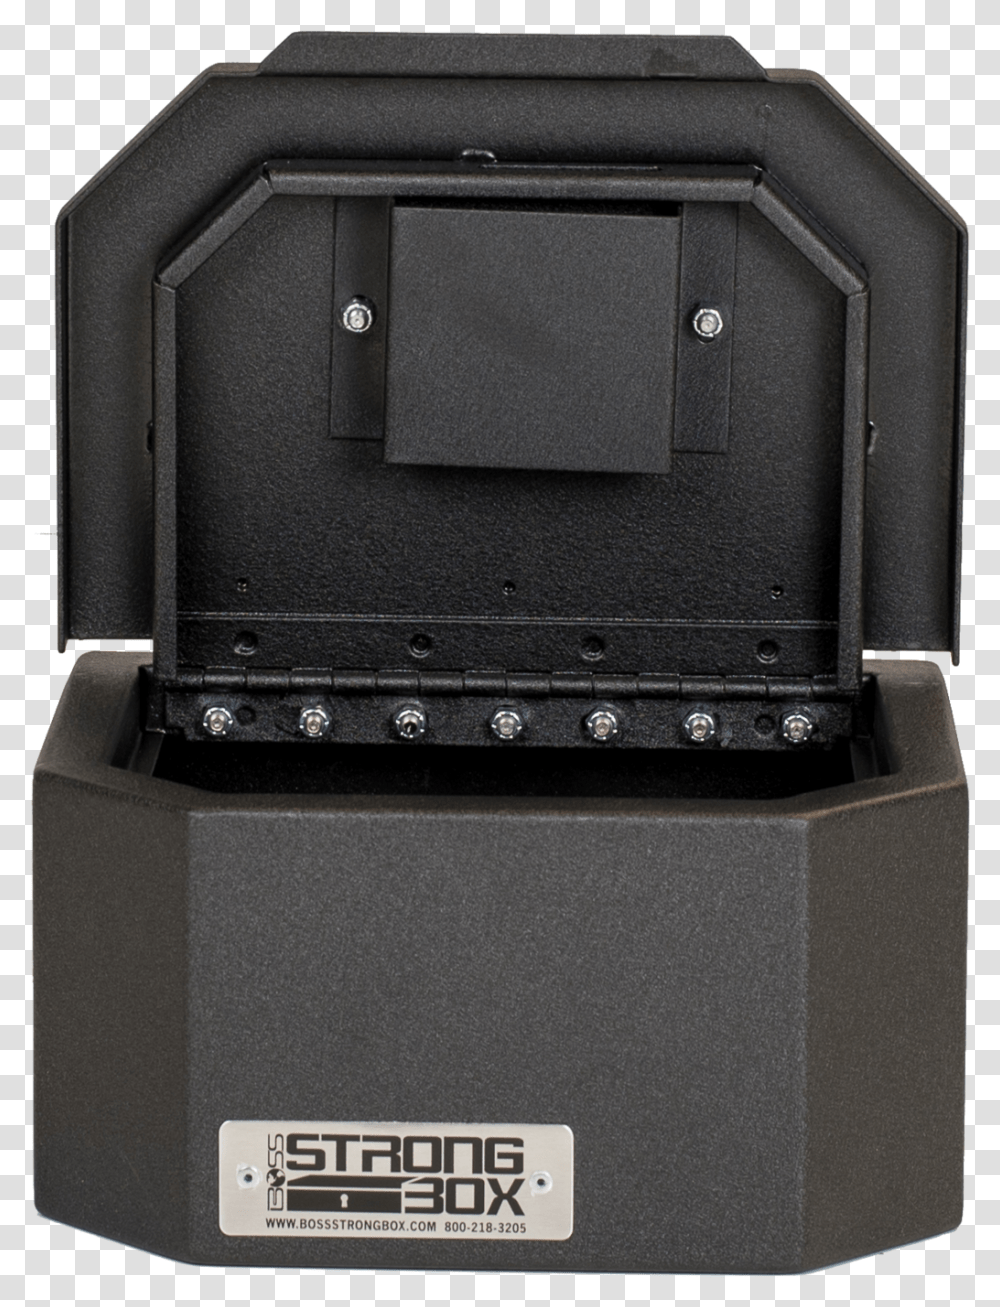 Top Loader Featuers 7125 7408 Instant Camera, Safe, Mailbox, Letterbox, Kiosk Transparent Png